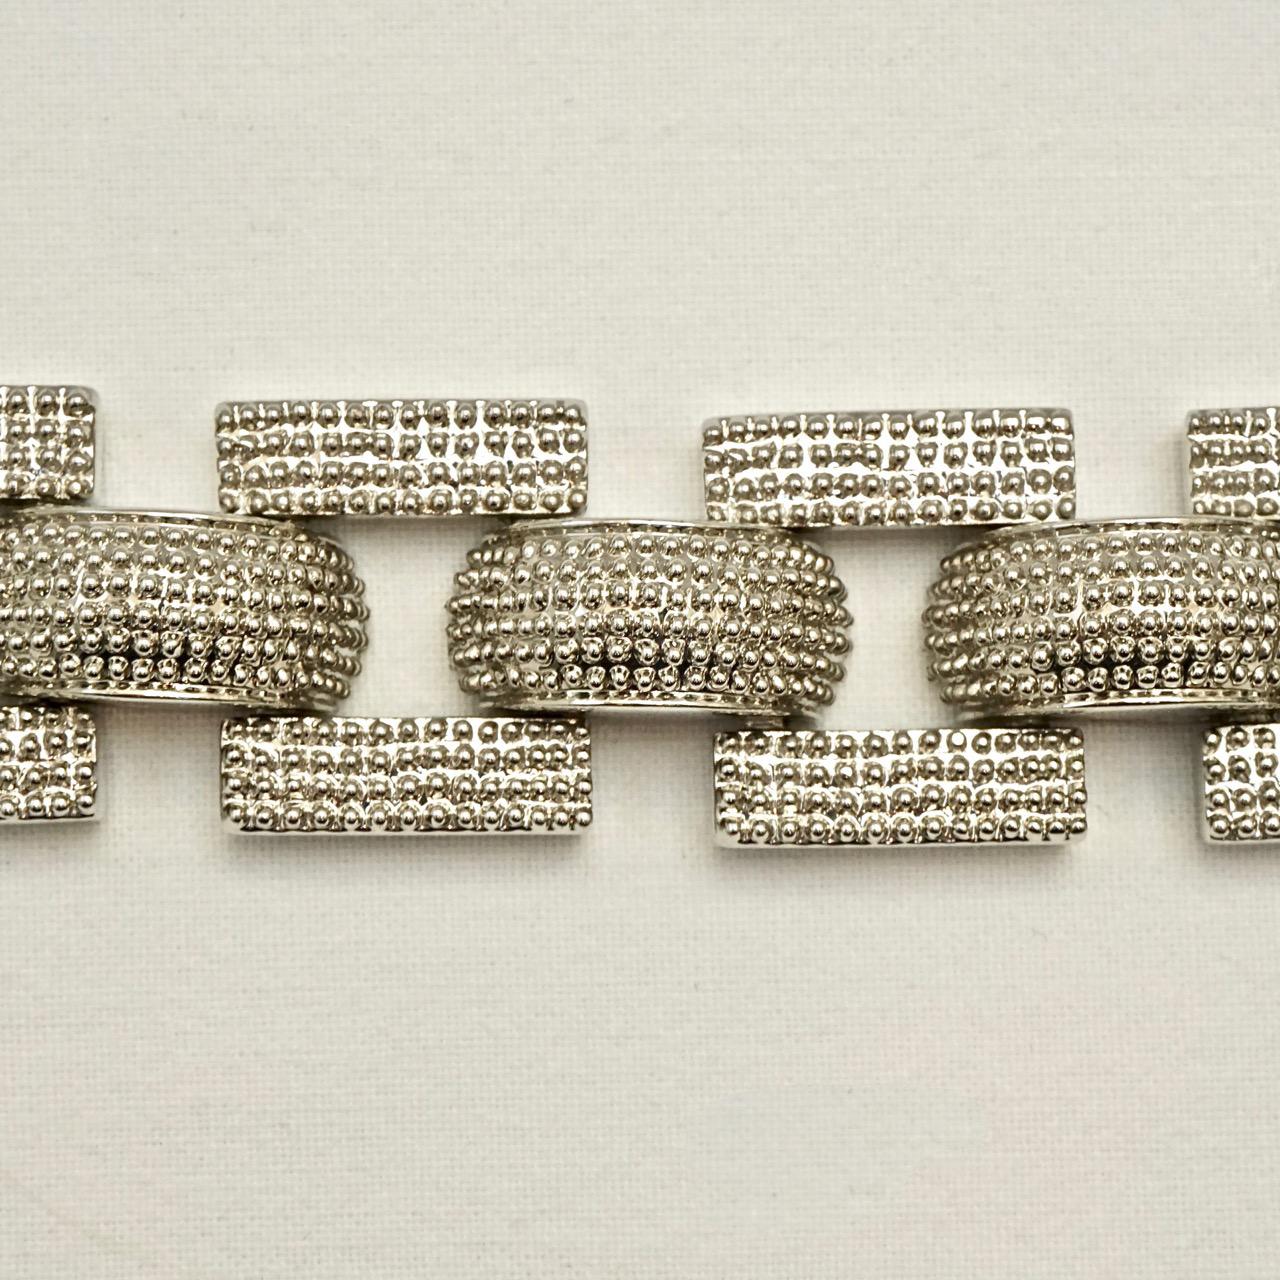 French heavy silver tone tank style link bracelet, featuring raised dome decoration. Length 17.5cm / 6.9 inches by width 2.15cm / .84 inch. The bracelet is in very good condition, with scratching as expected.

This is a wonderful silver tone